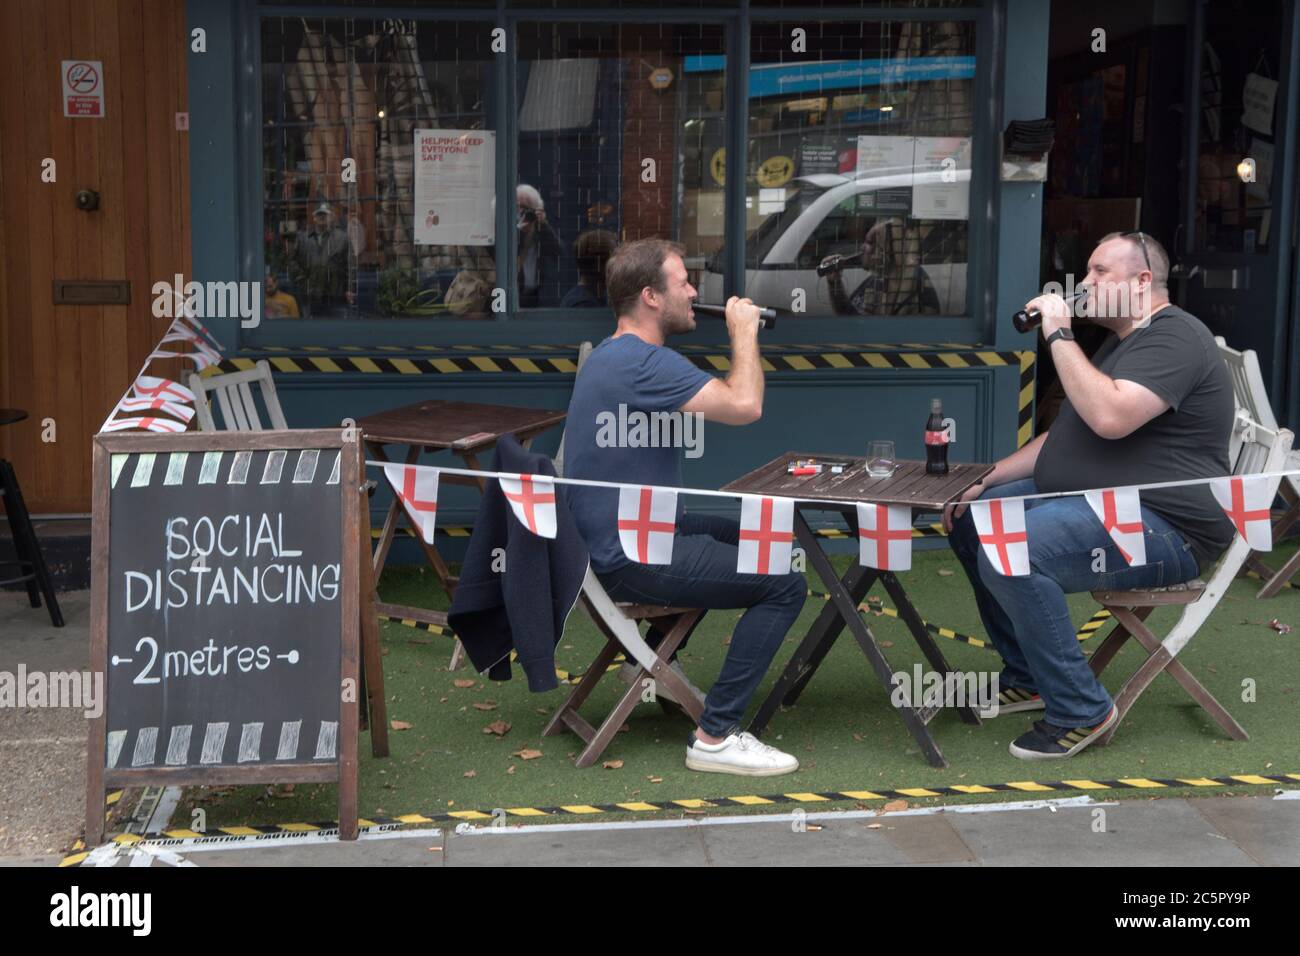 UK Social Distancing 2 metres apart. Super Saturday, London 4th July 2020 bars and pubs reopen with restrictions in place, social distancing, table service outside. Portobello Road young Londoners. 2020s England   HOMER SYKES Stock Photo